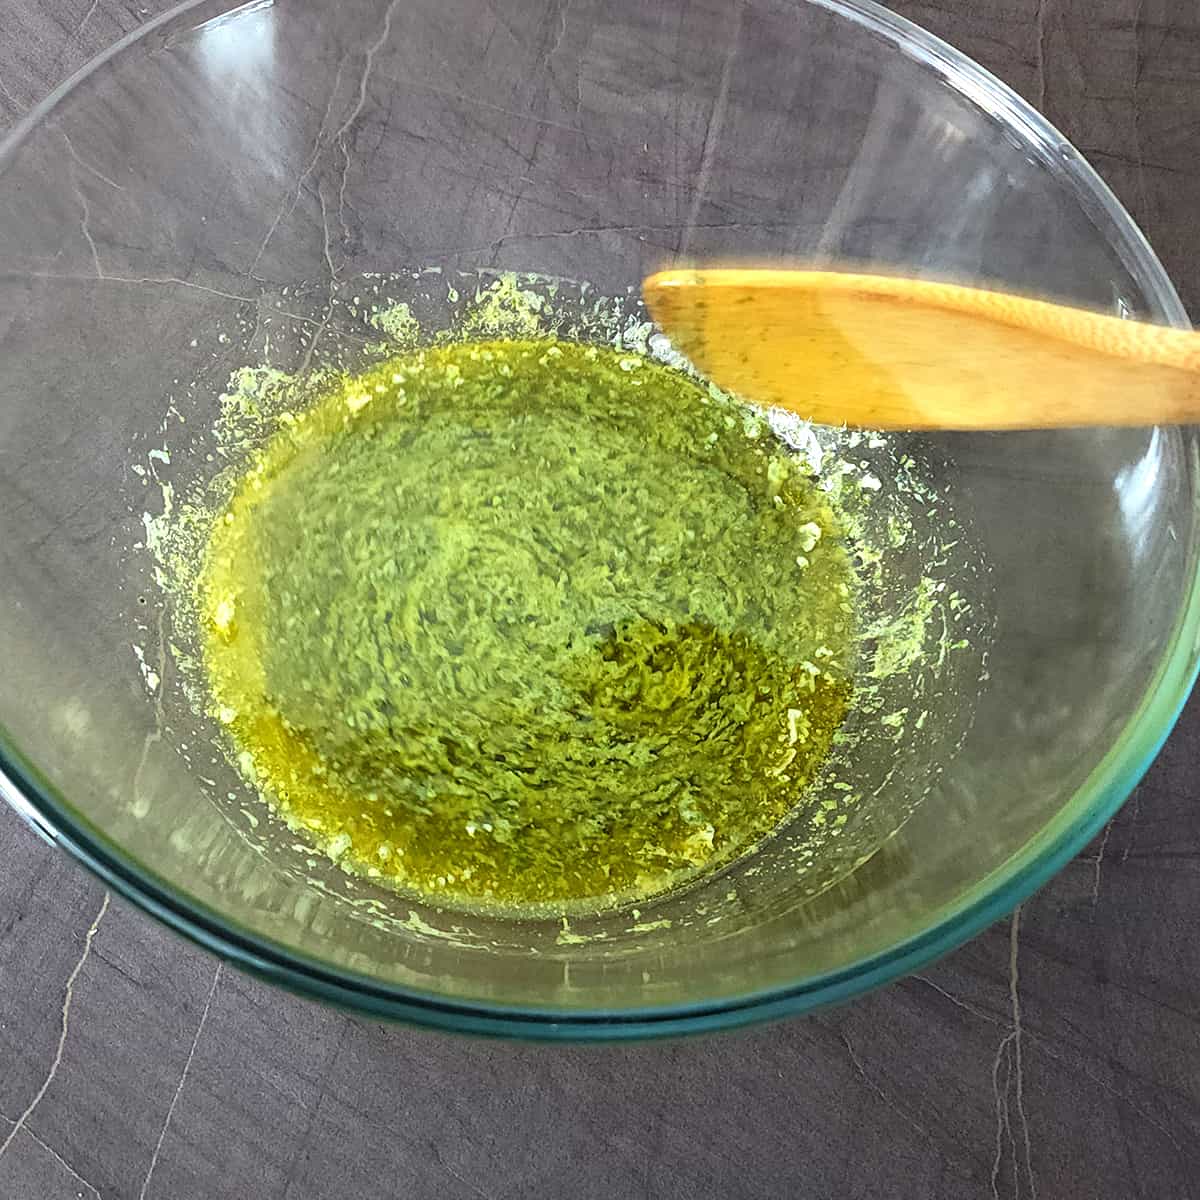 Mix melted butter with garlic herb lemon mixture. 